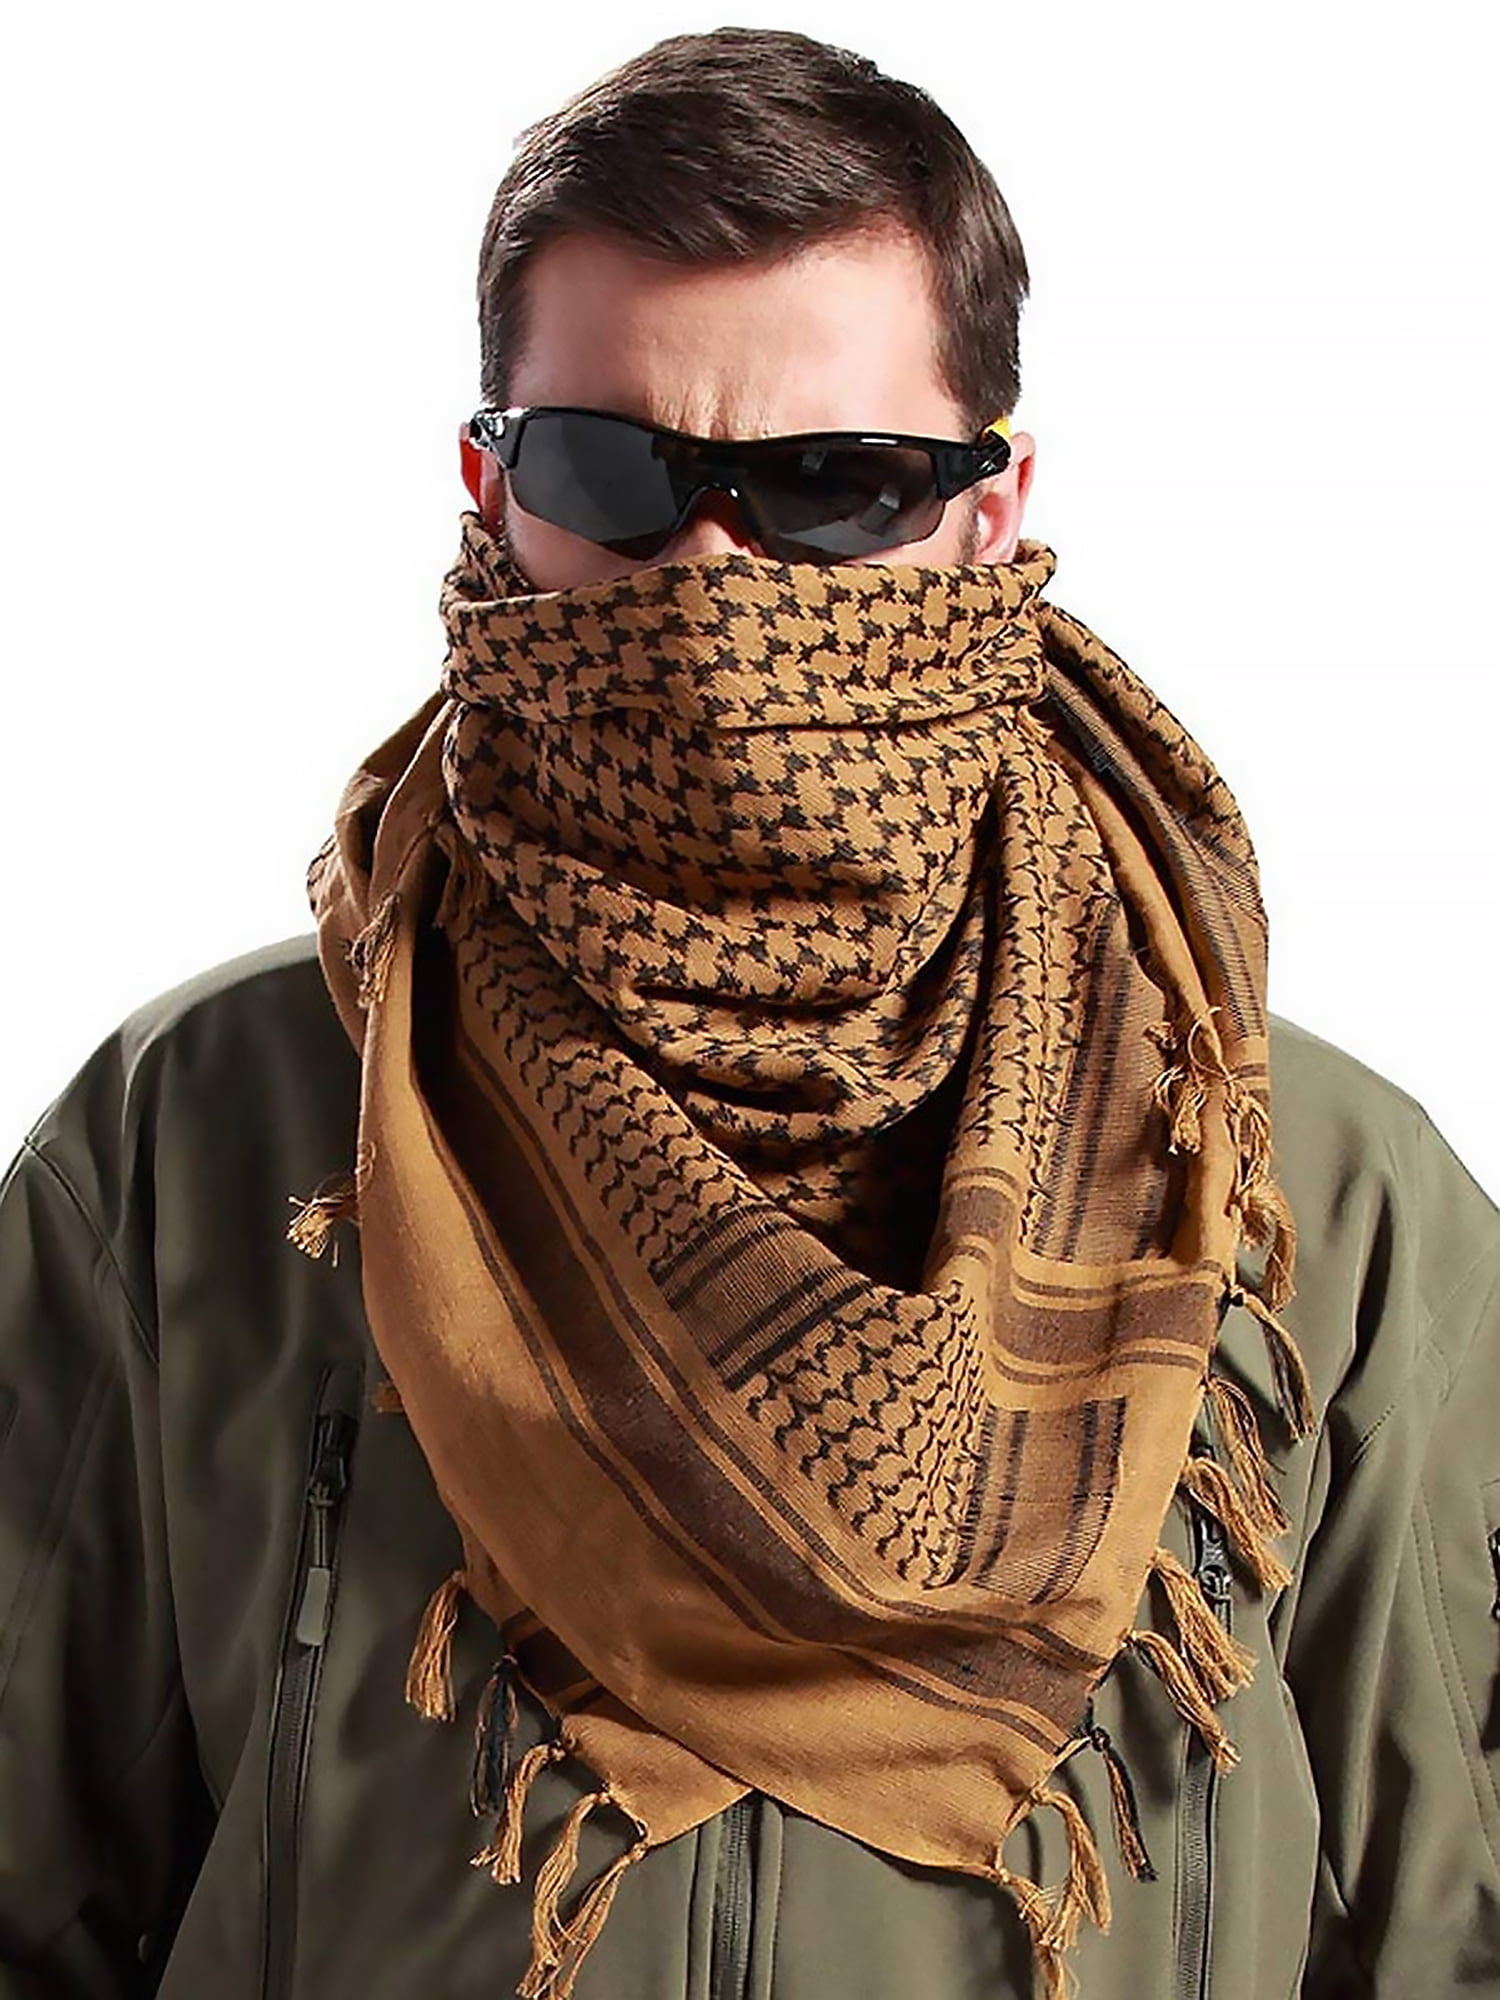 MiaoMa 100% Cotone Military shemagh Tactical Desert Keffiyeh Scarf Wrap 